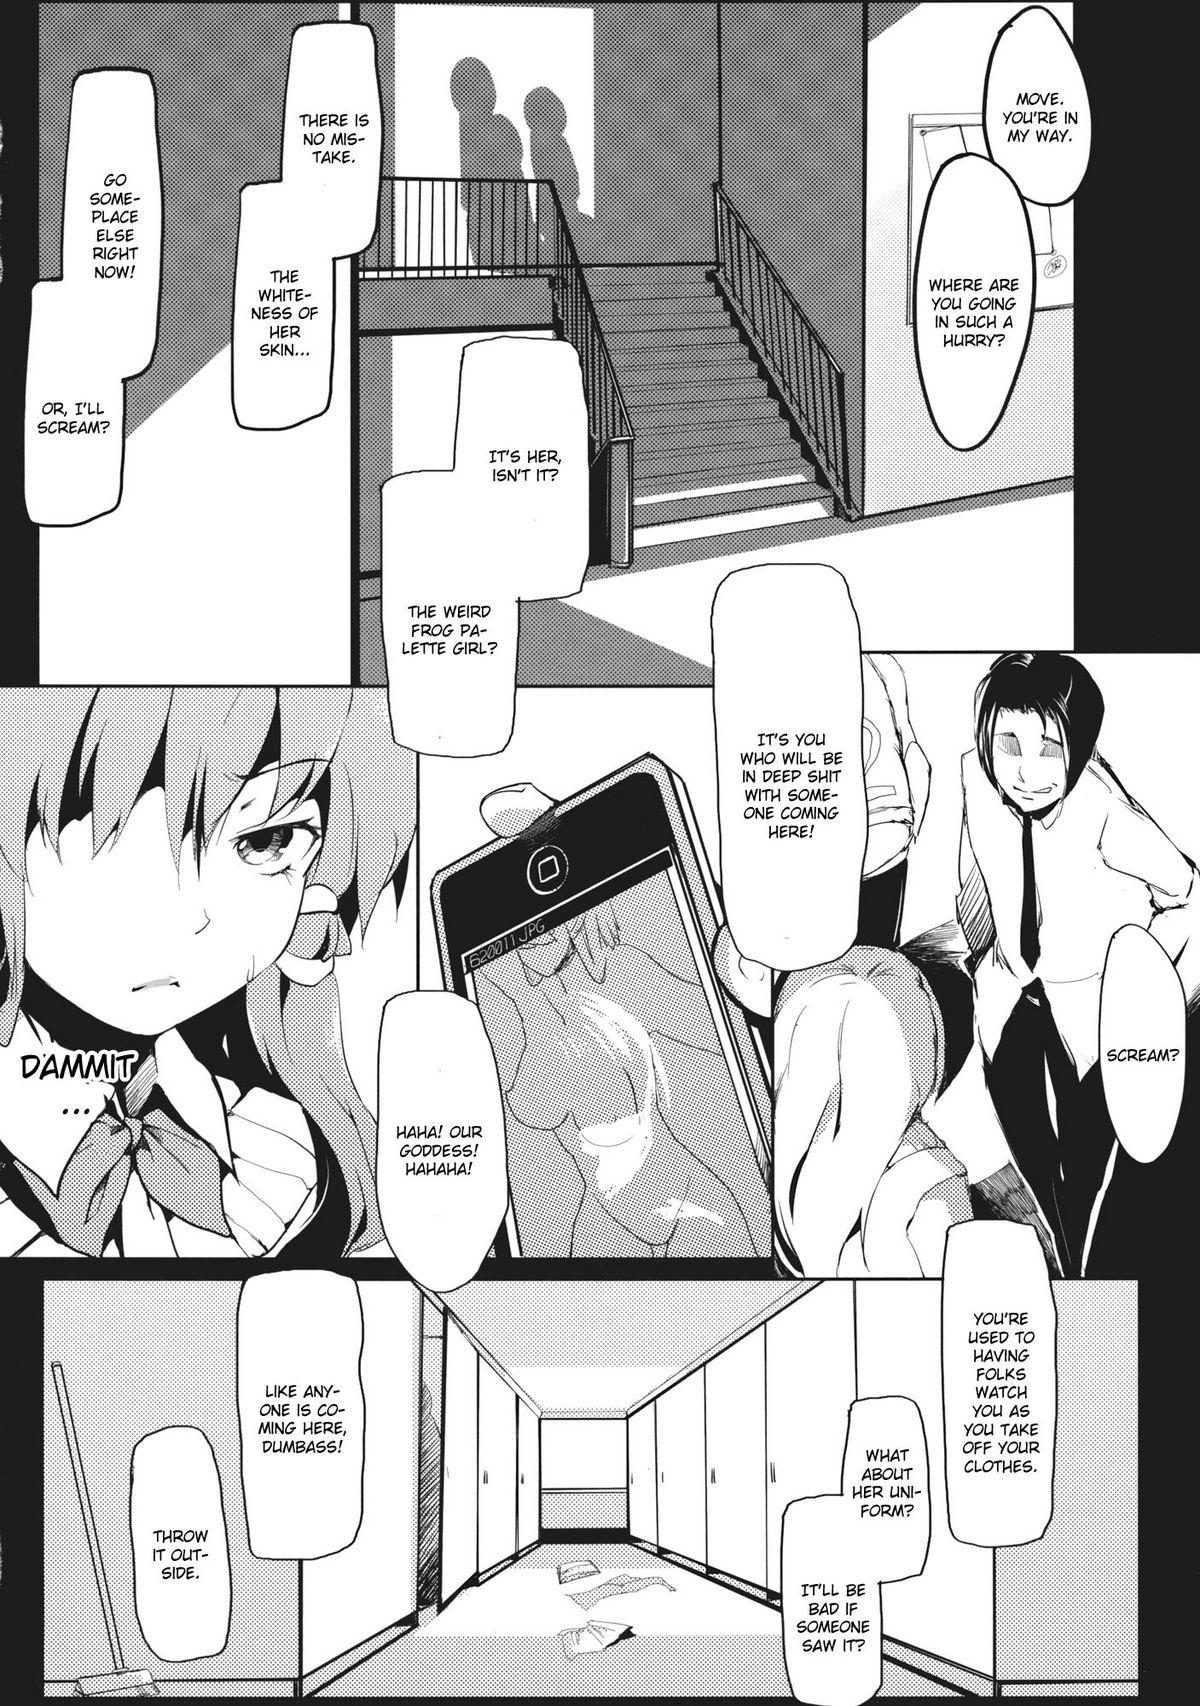 Dando Signal Lost - Touhou project Shower - Page 10